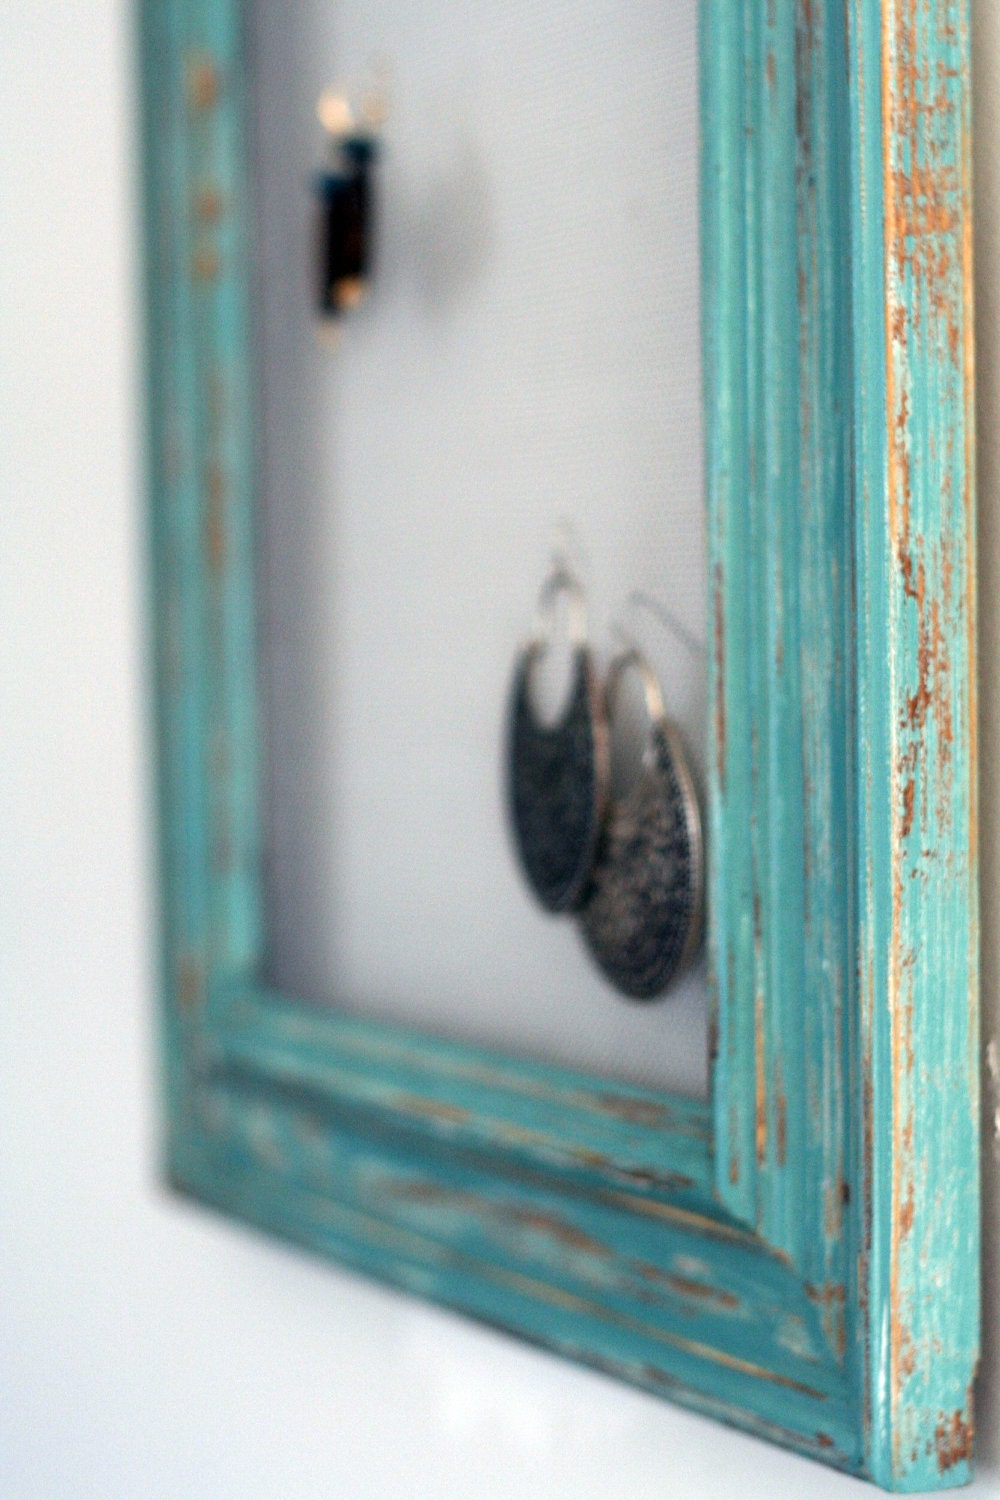 Teal Earring Frame Distressed